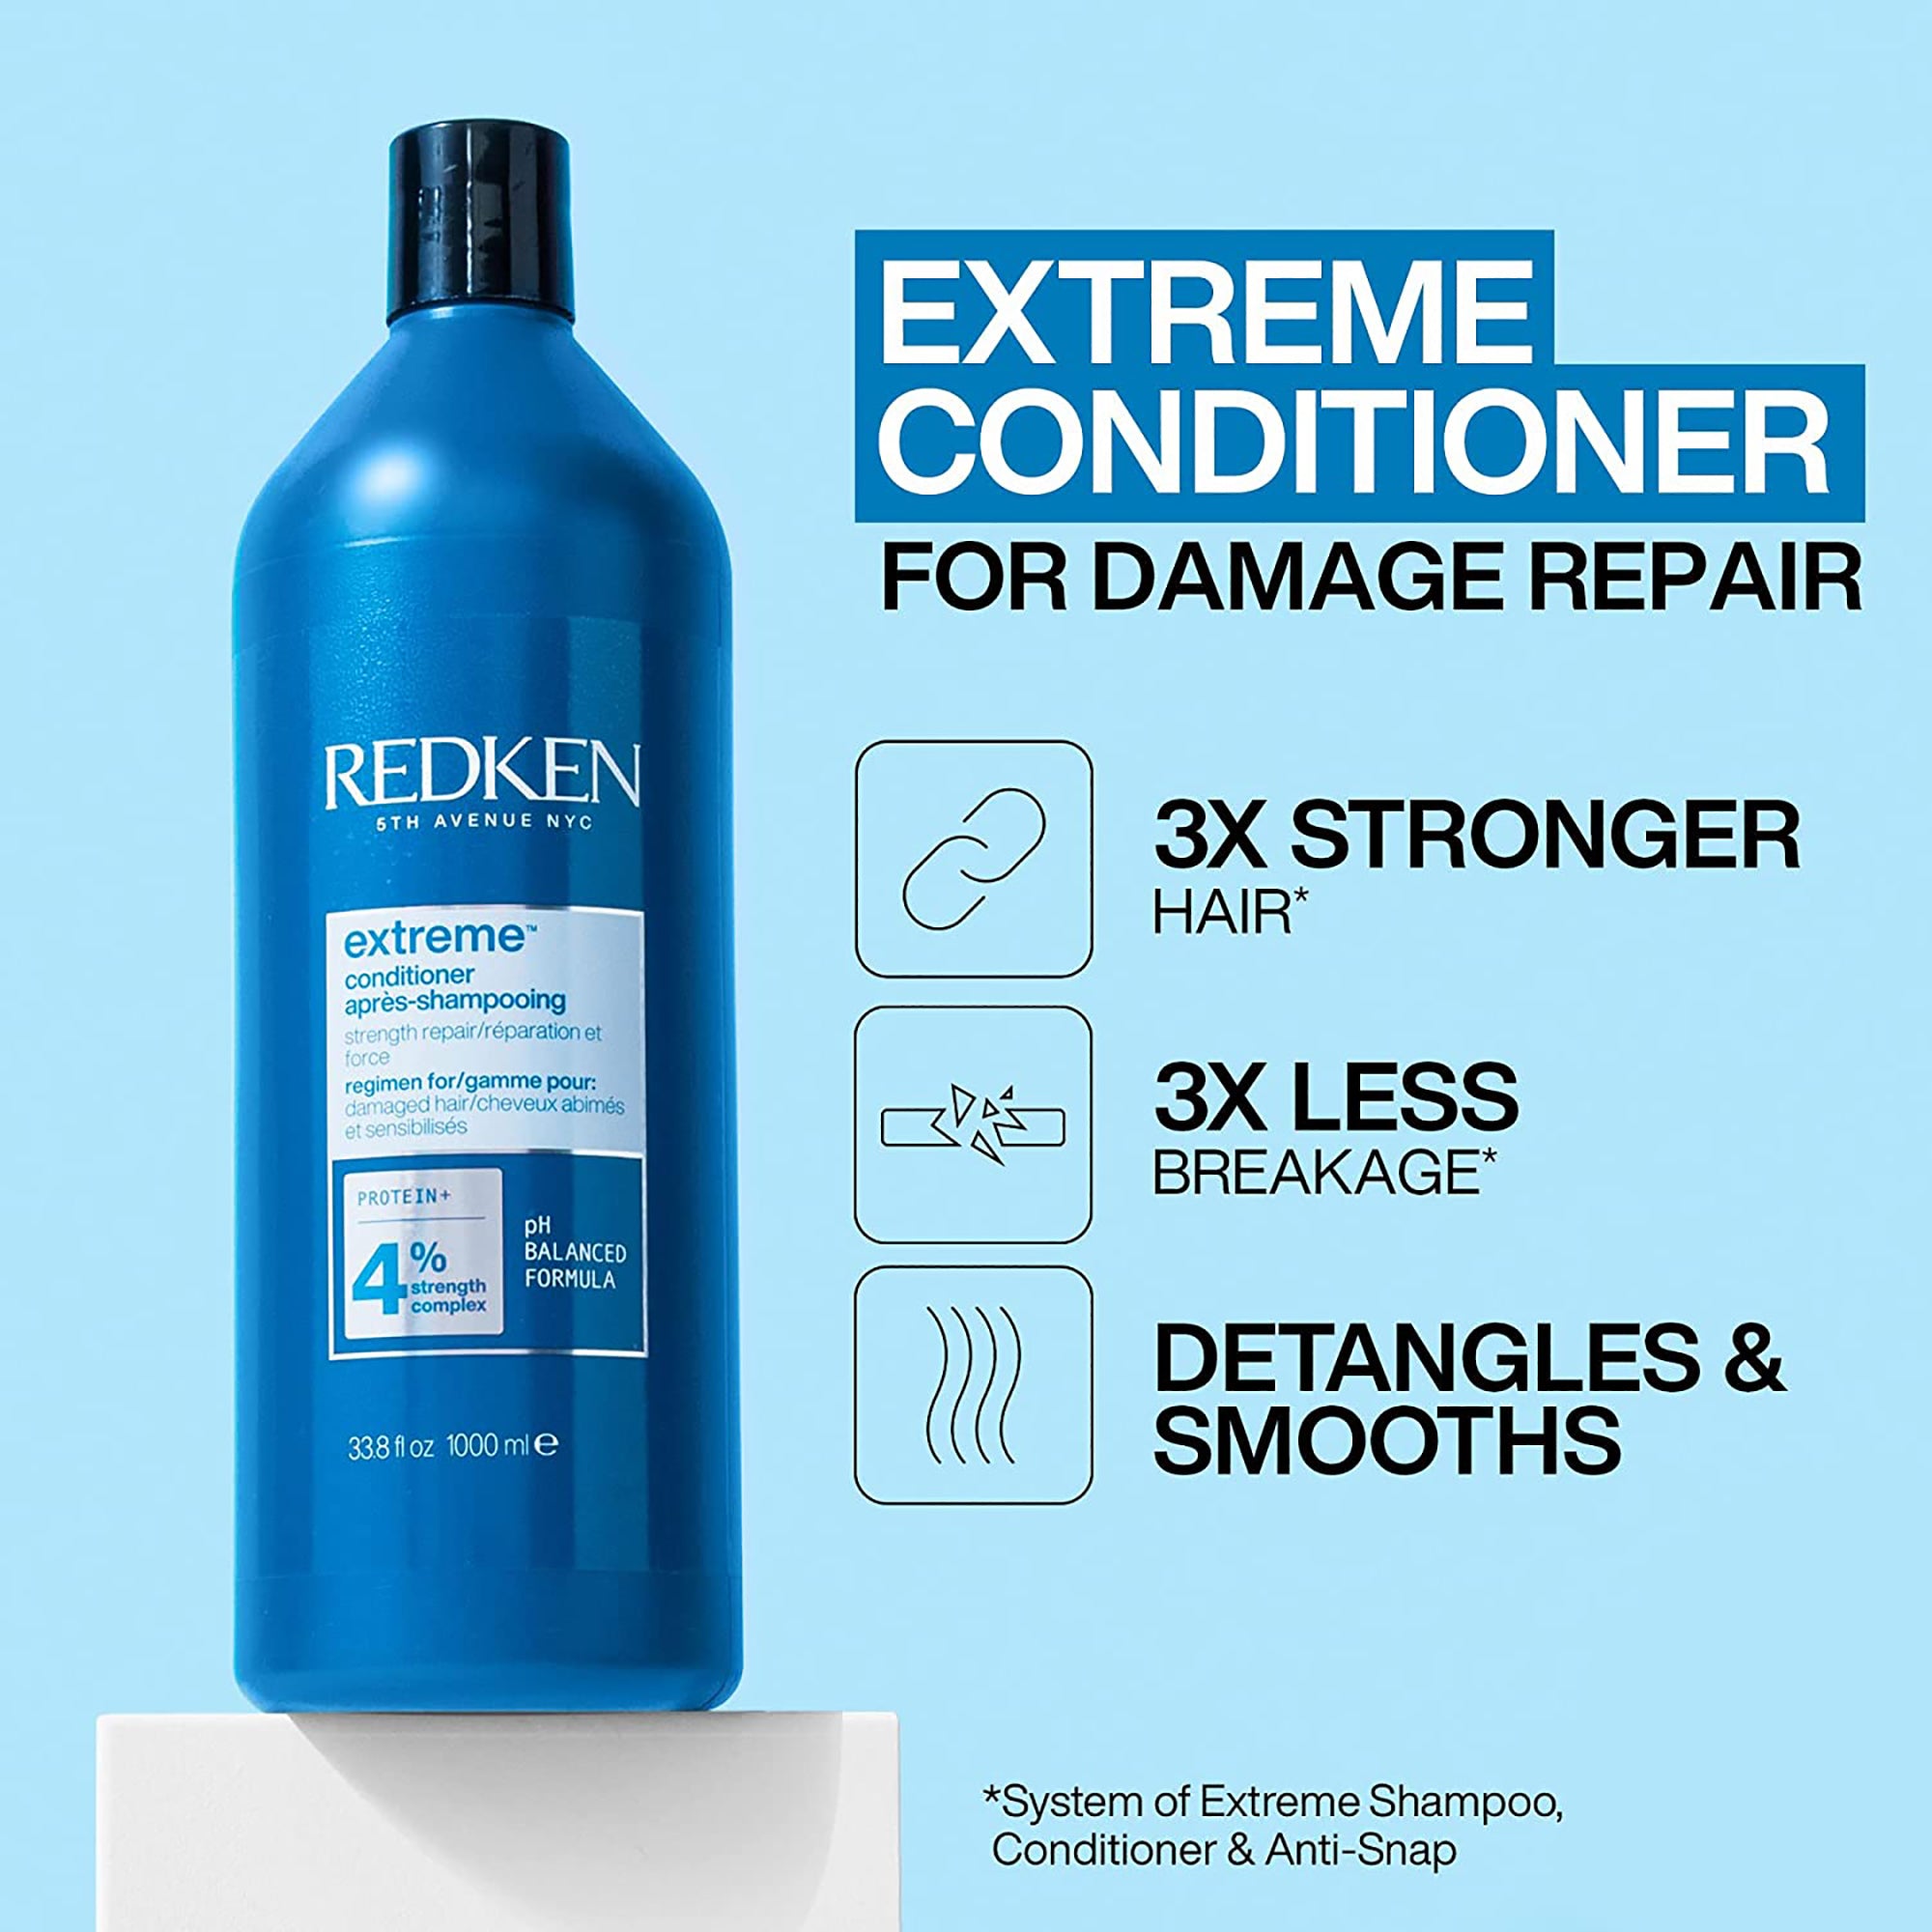 Redken Extreme Shampoo and Conditioner Liter Duo ($100 Value) / DUO